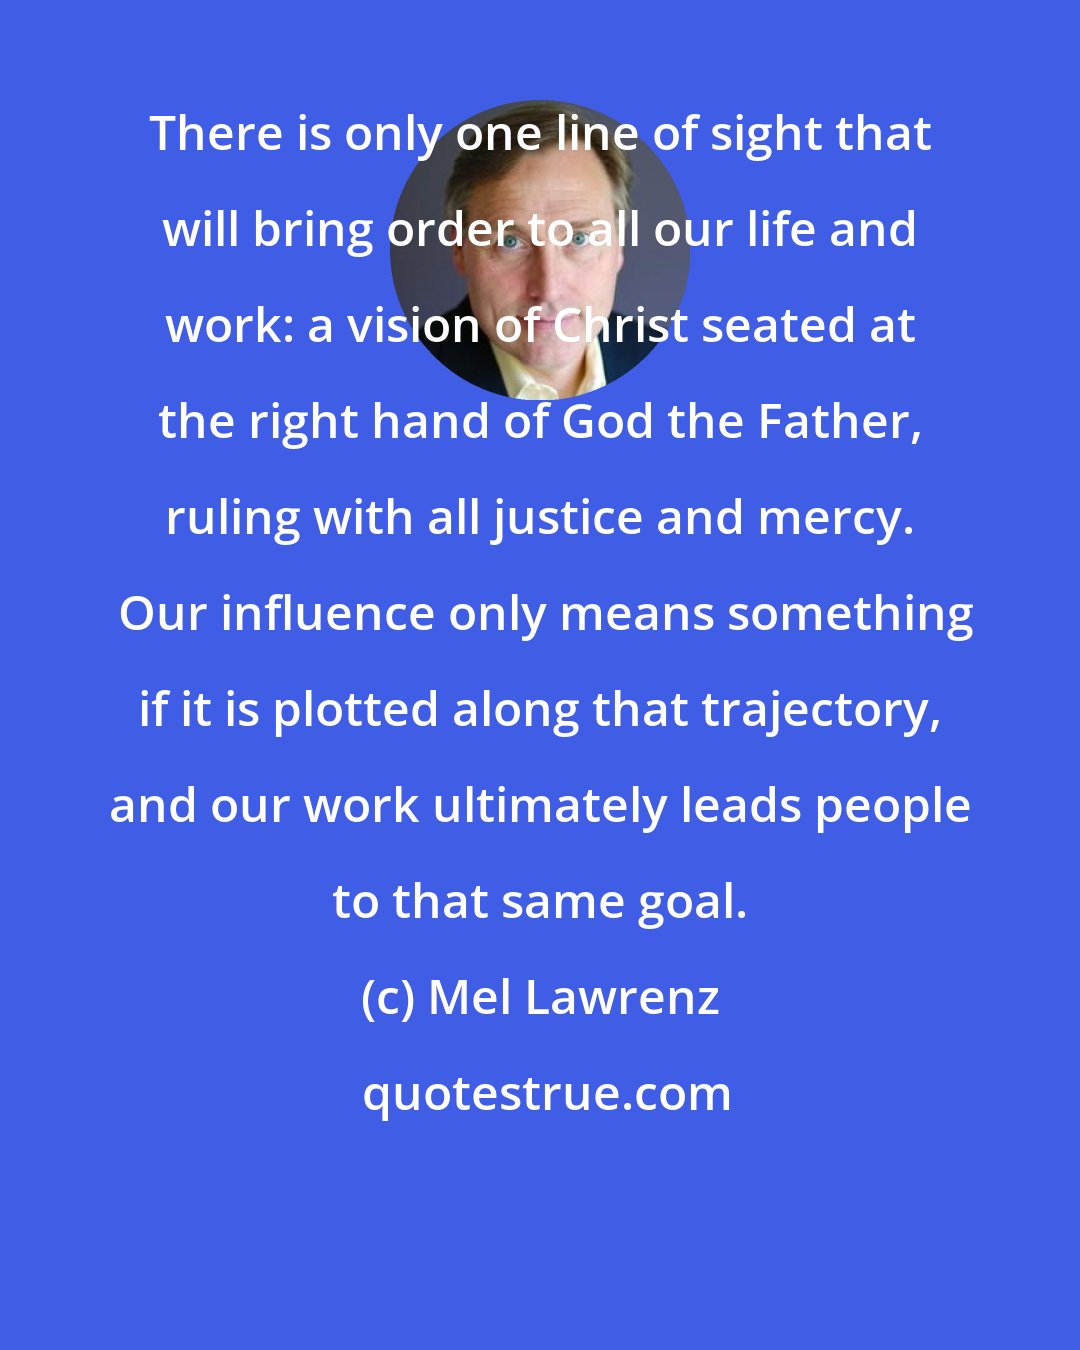 Mel Lawrenz: There is only one line of sight that will bring order to all our life and work: a vision of Christ seated at the right hand of God the Father, ruling with all justice and mercy.  Our influence only means something if it is plotted along that trajectory, and our work ultimately leads people to that same goal.